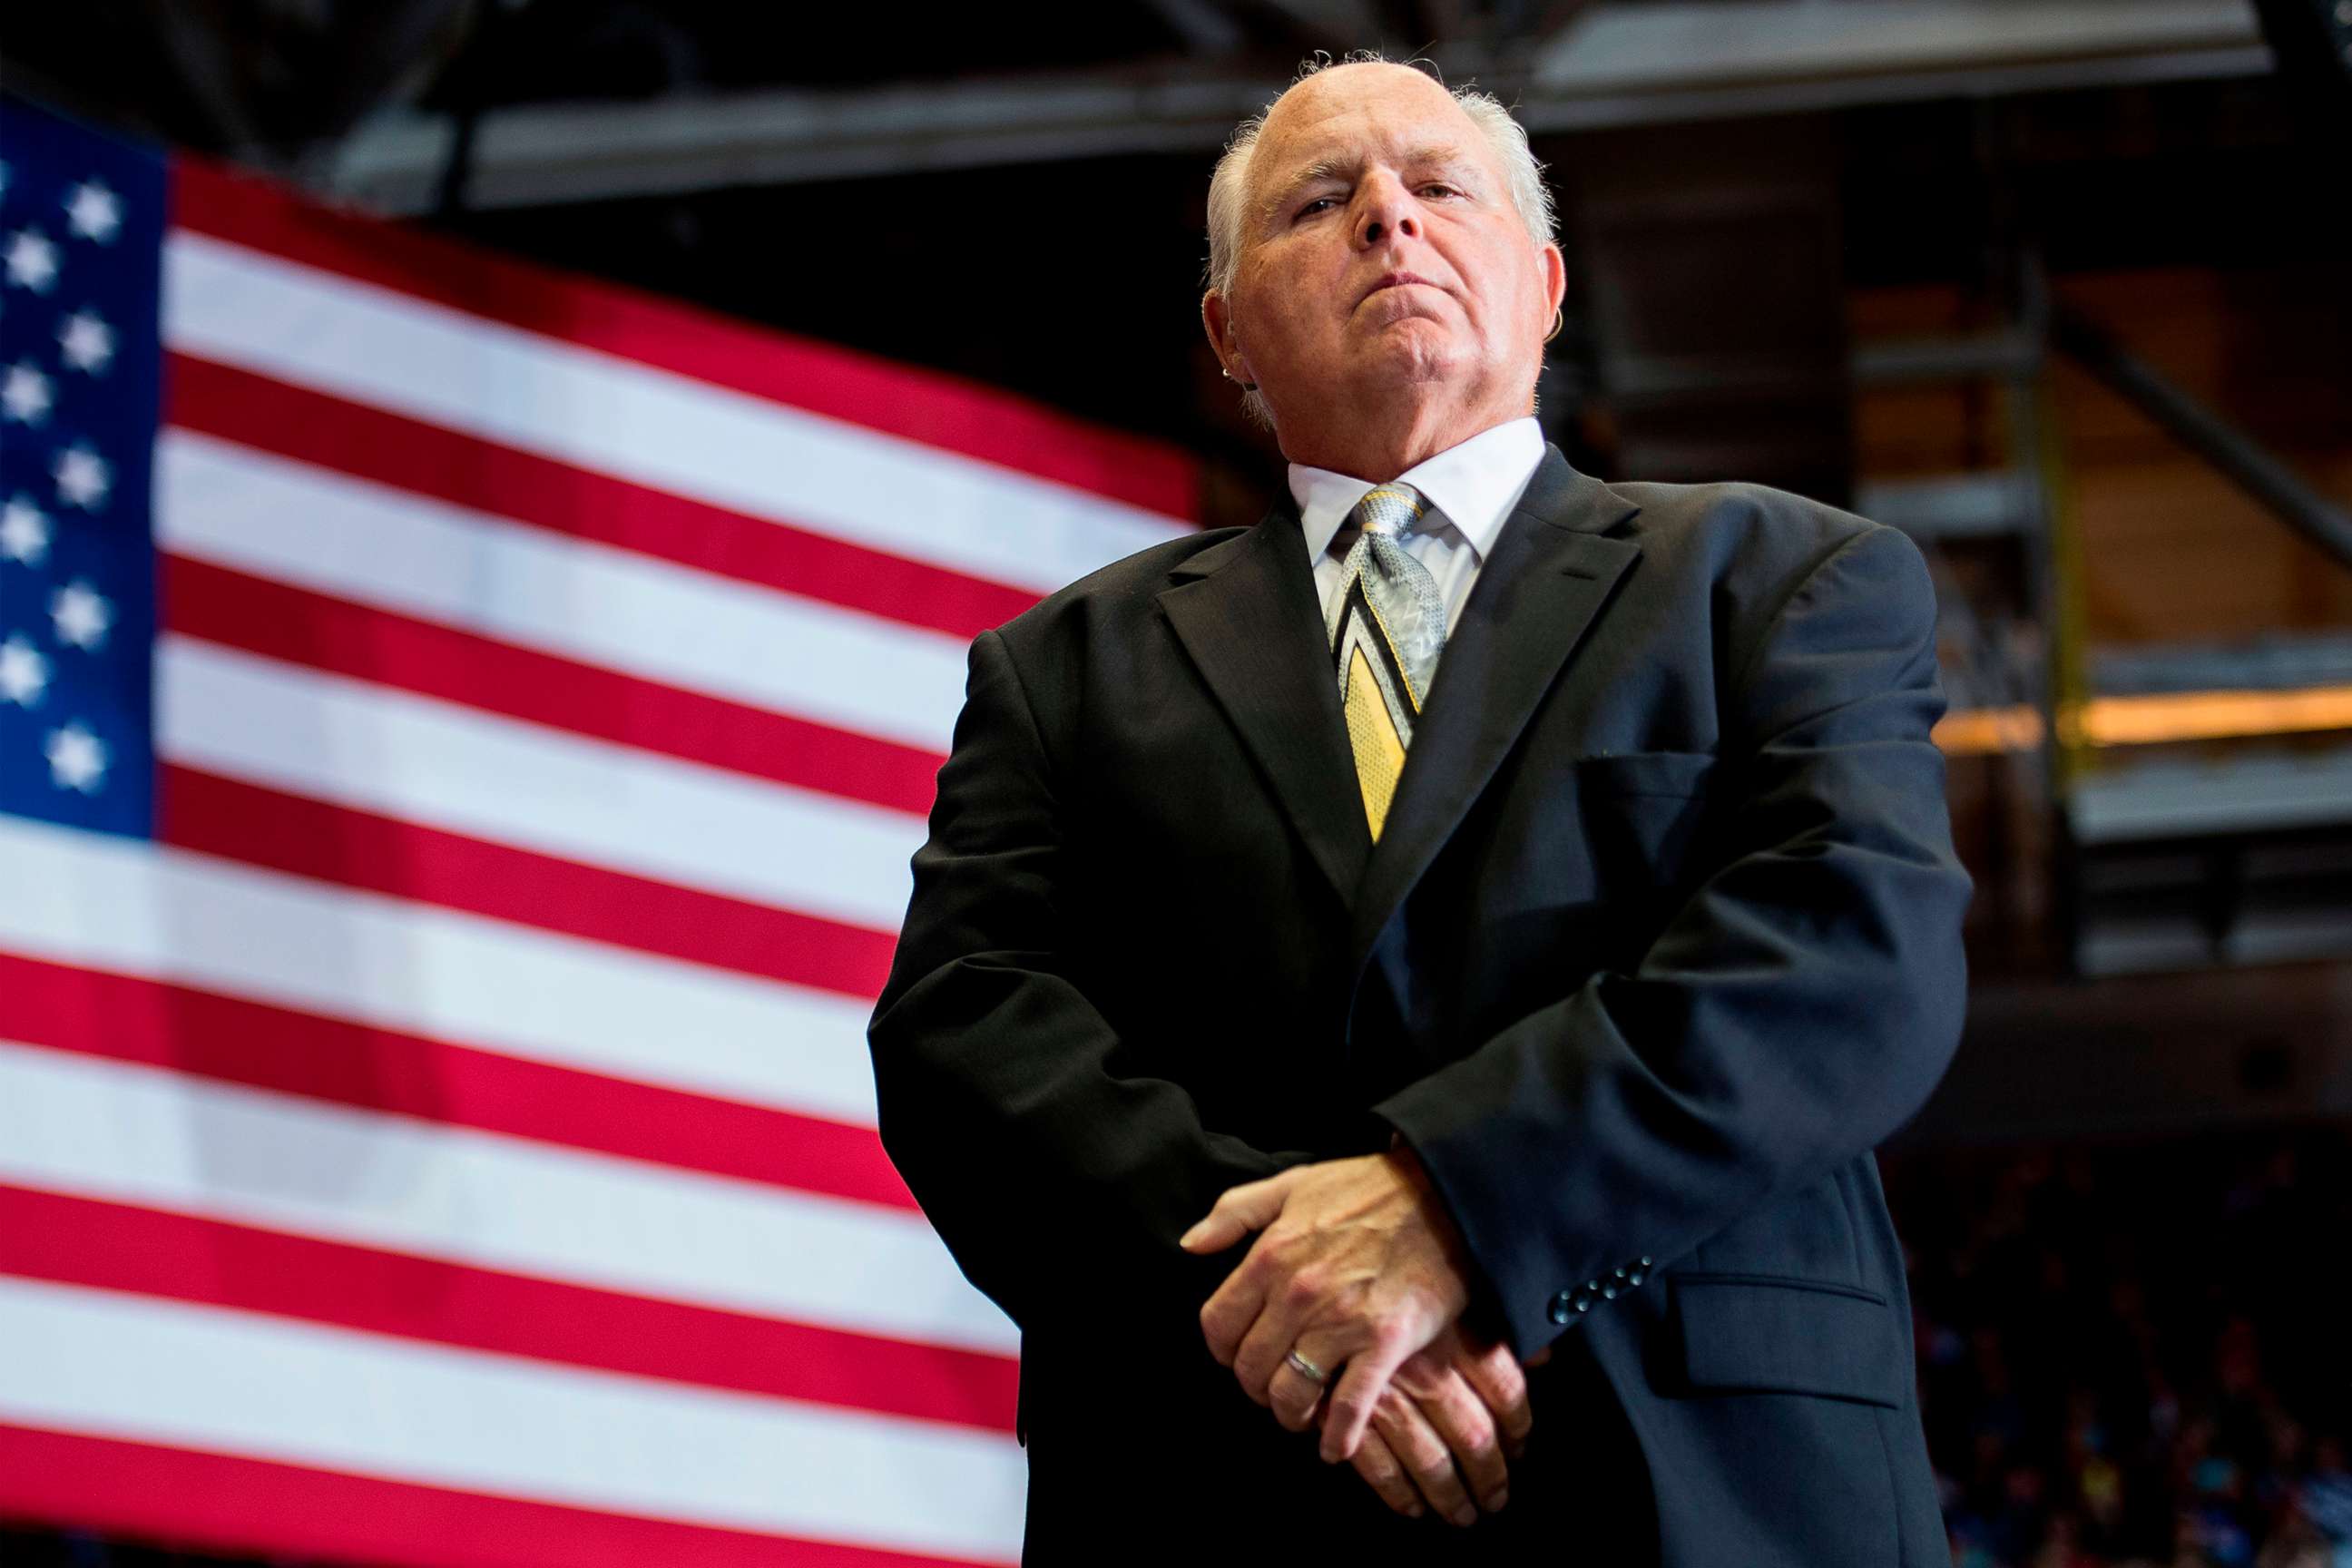 PHOTO: Rush Limbaugh looks on before introducing President Donald Trump to deliver remarks at a "Make America Great Again" rally in Cape Girardeau, Mo, Nov. 5, 2018.